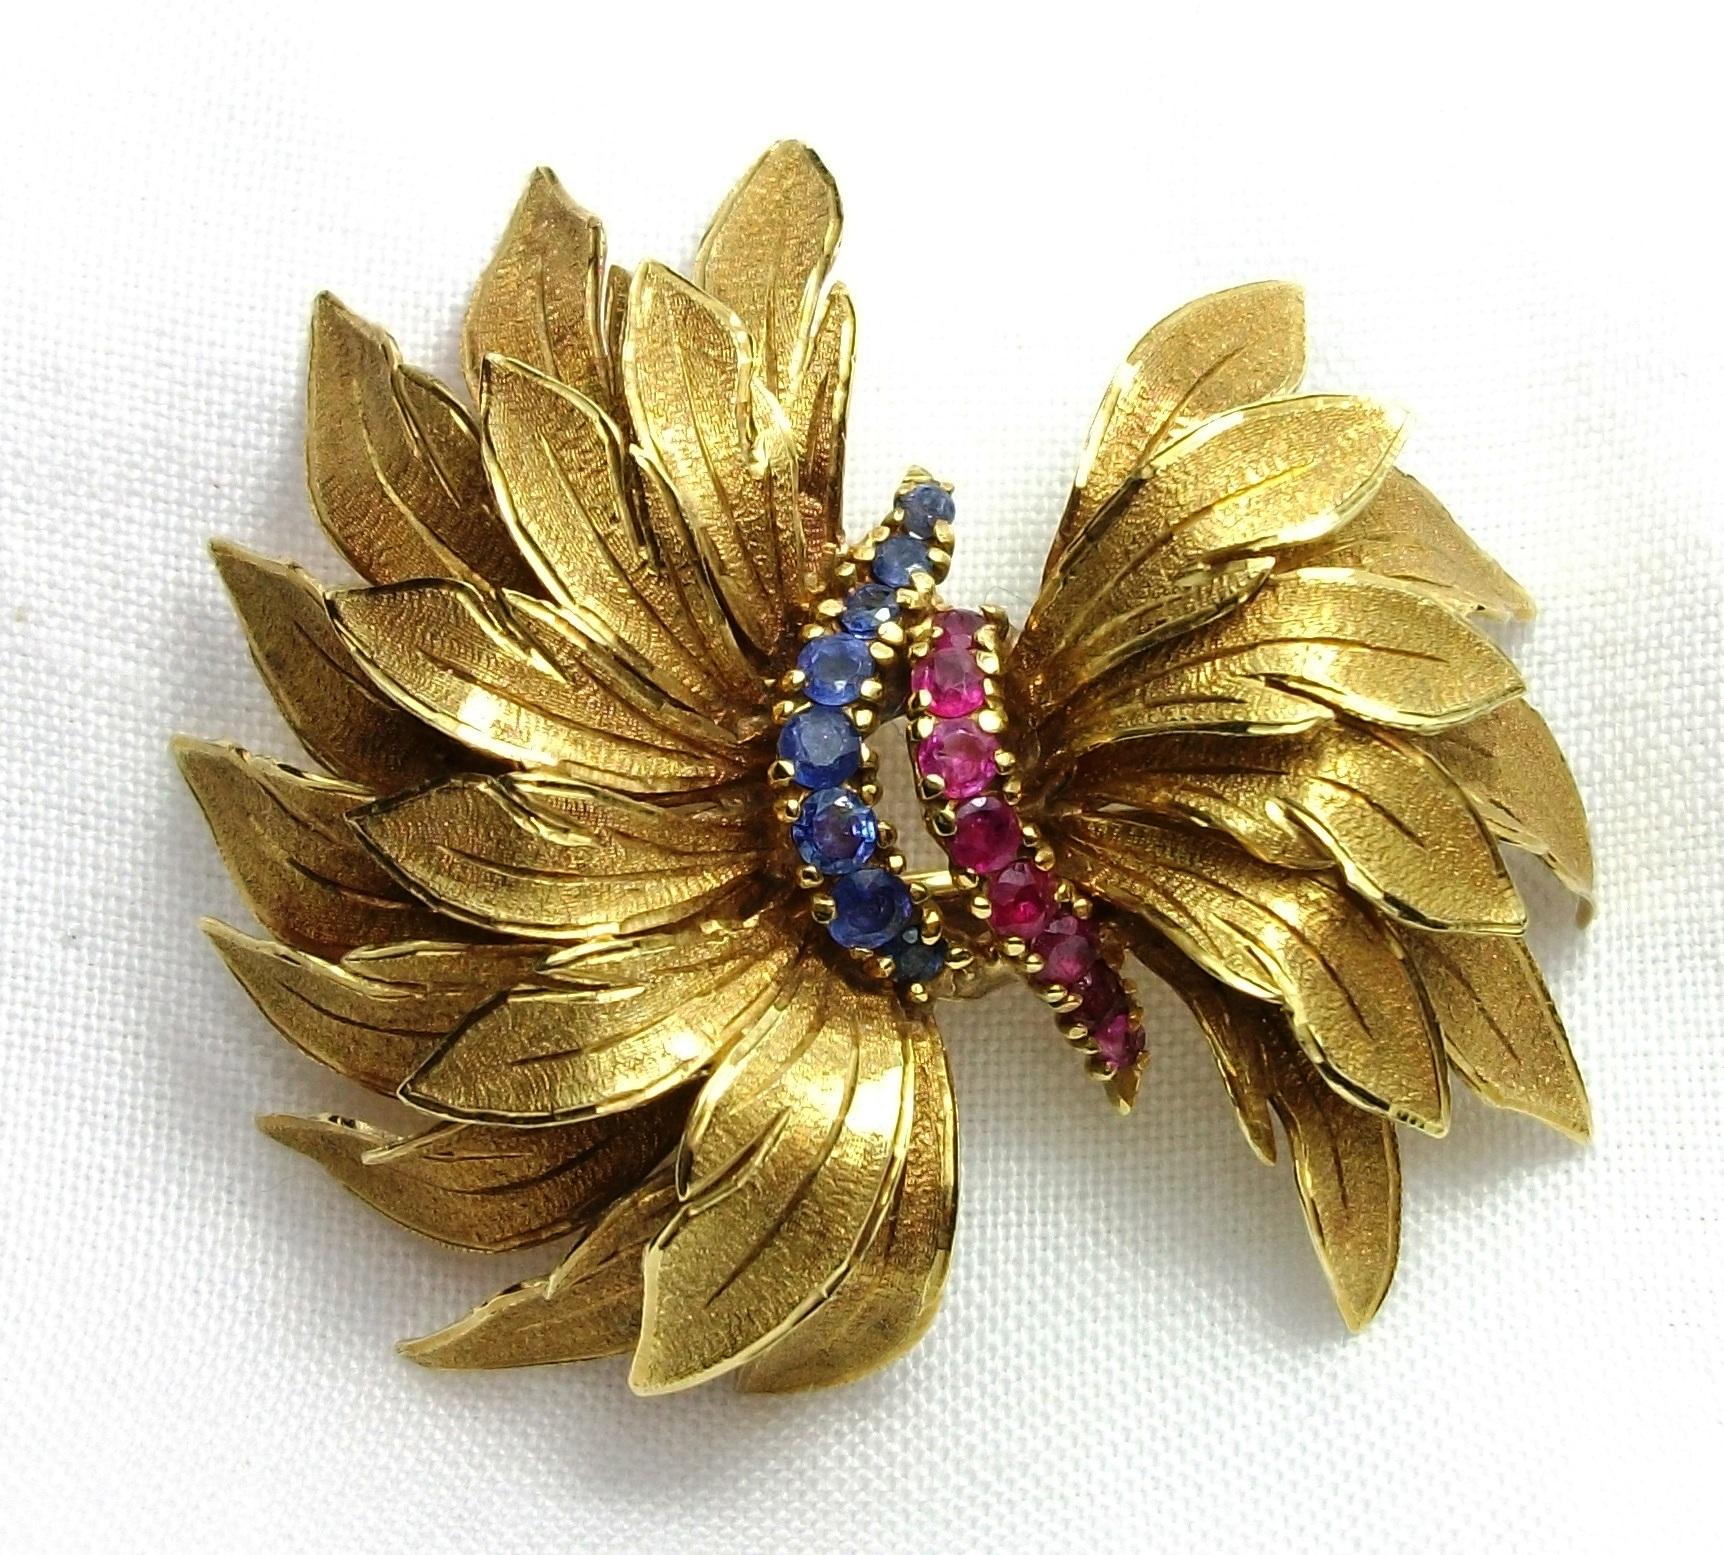 Retro Vintage 1950s Rubies Sapphires 18 Karat Yellow Gold Bow Brooch For Sale